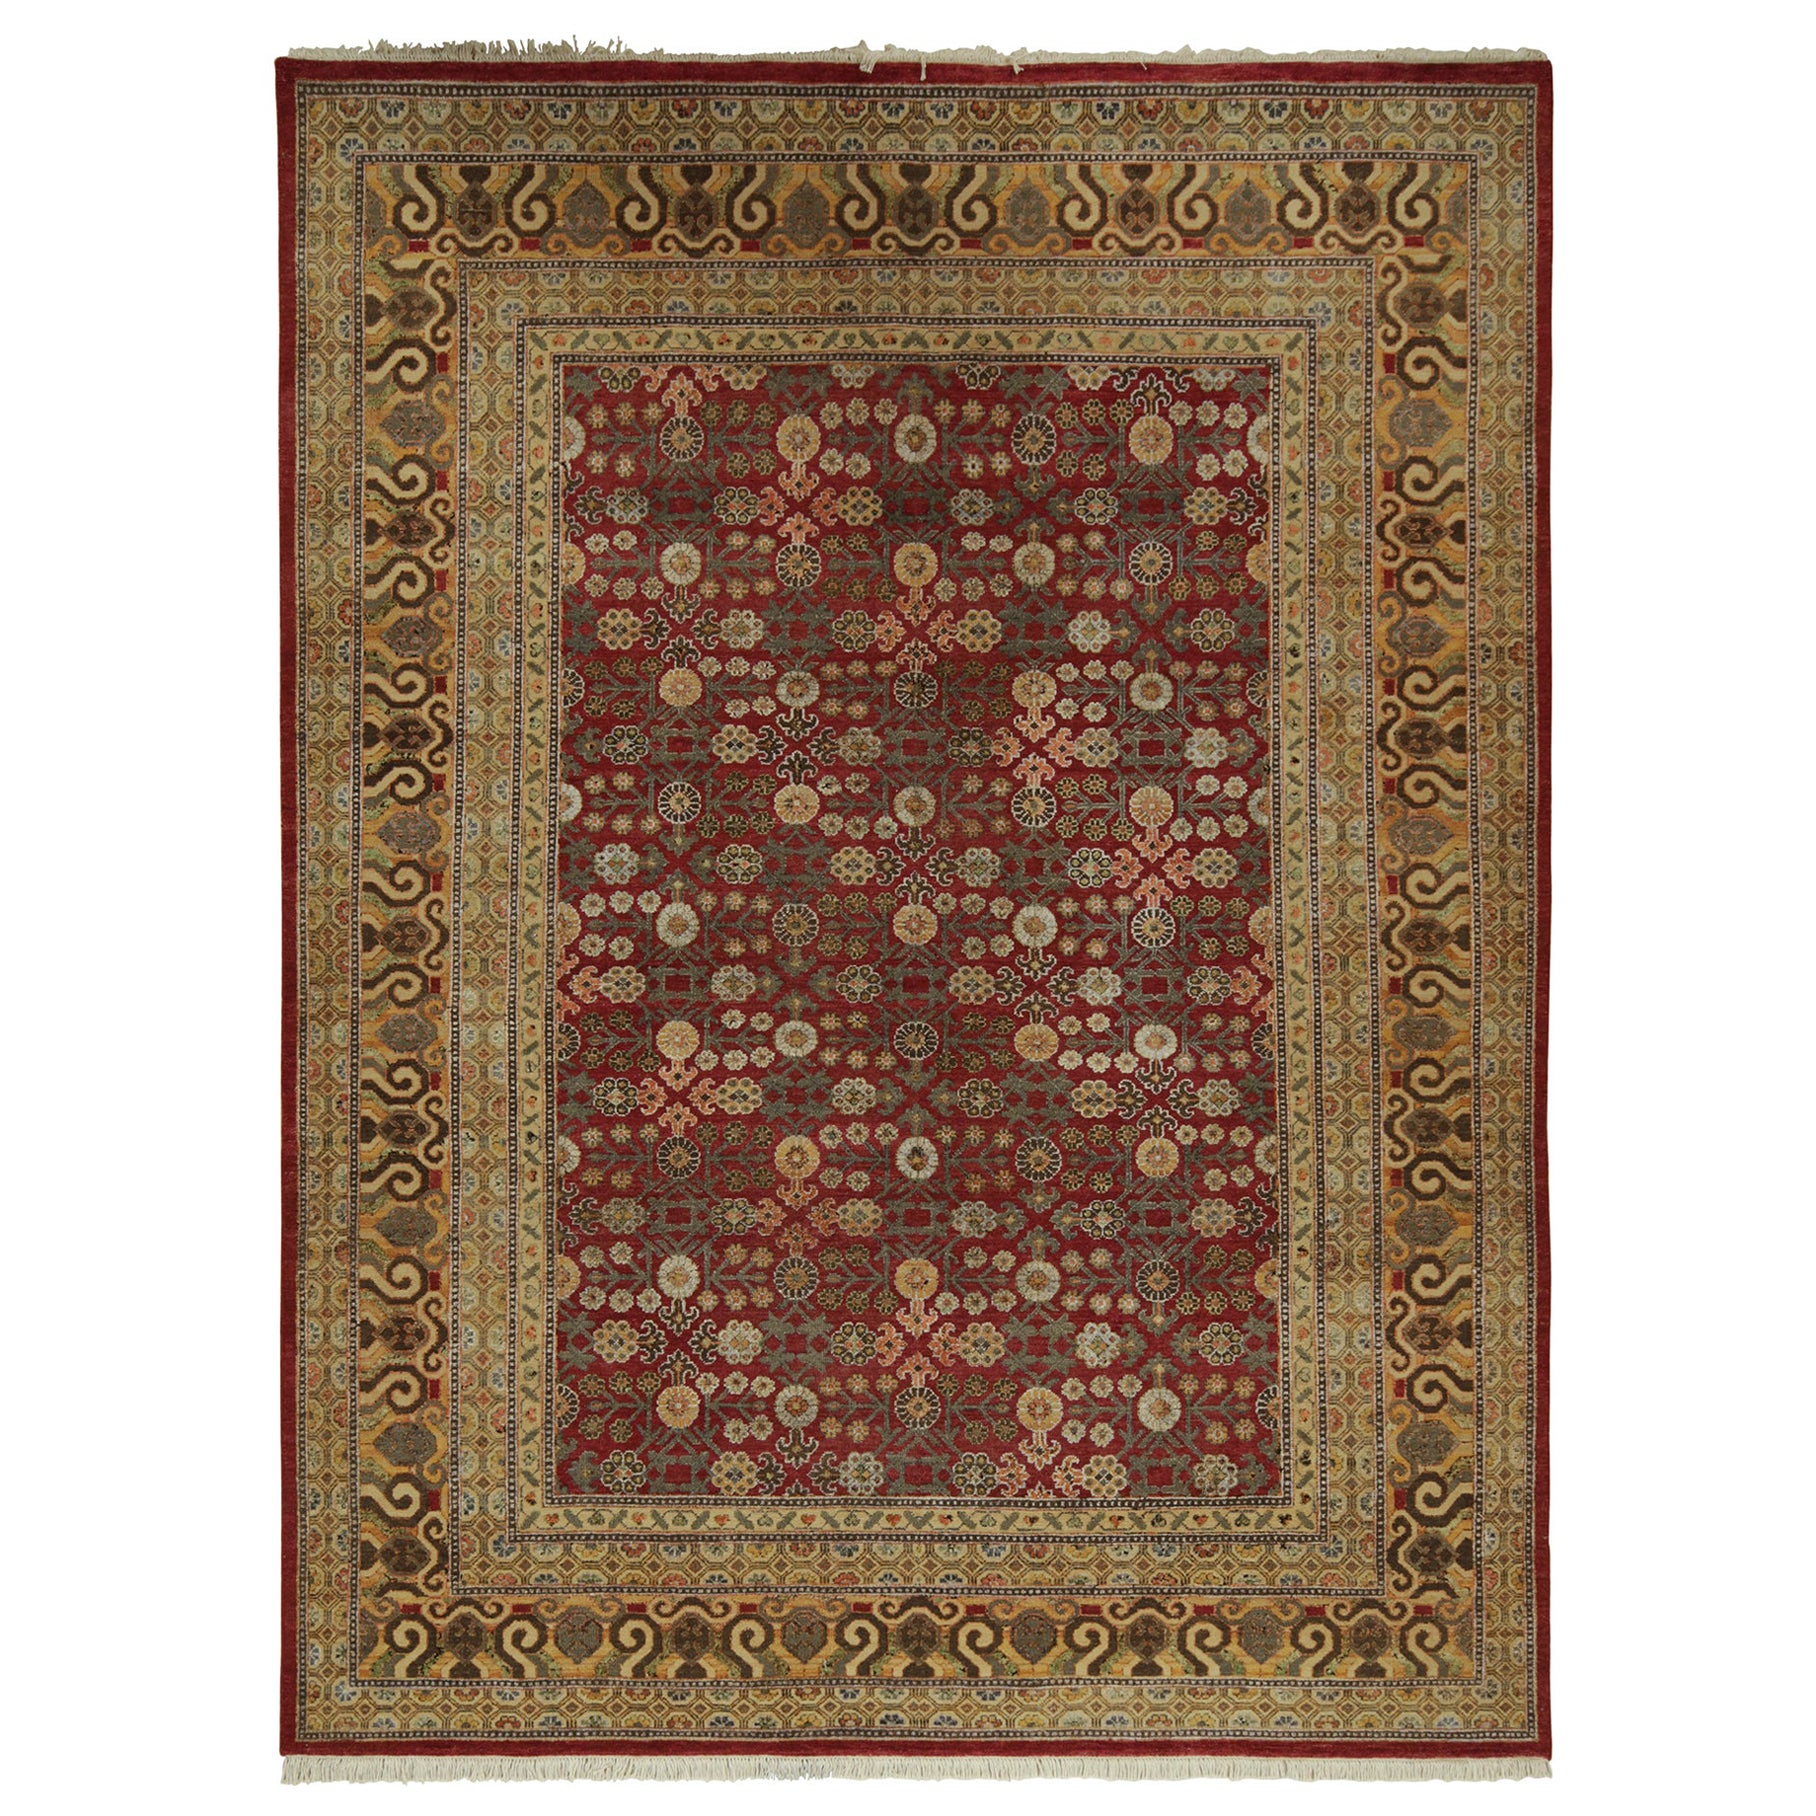 Rug & Kilim’s Khotan Style Rug with Maroon and Gold with Floral Patterns For Sale